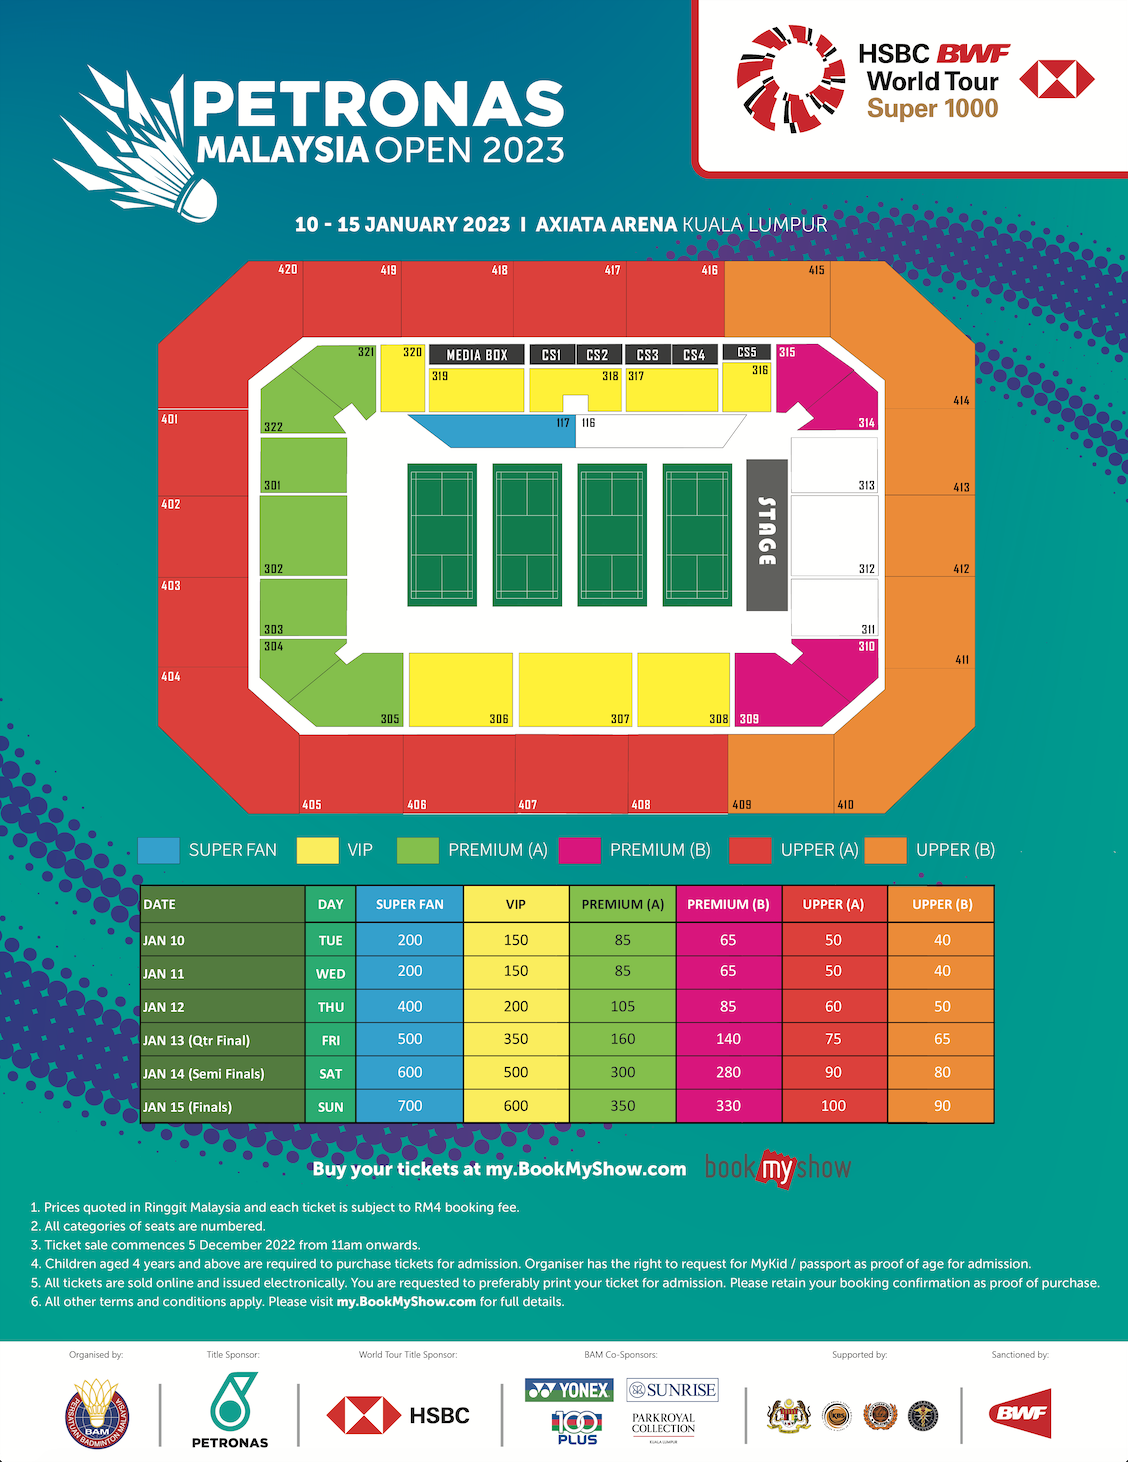 Badminton Fans Disappointed With Petronas Malaysia Open 2023 Ticket Prices